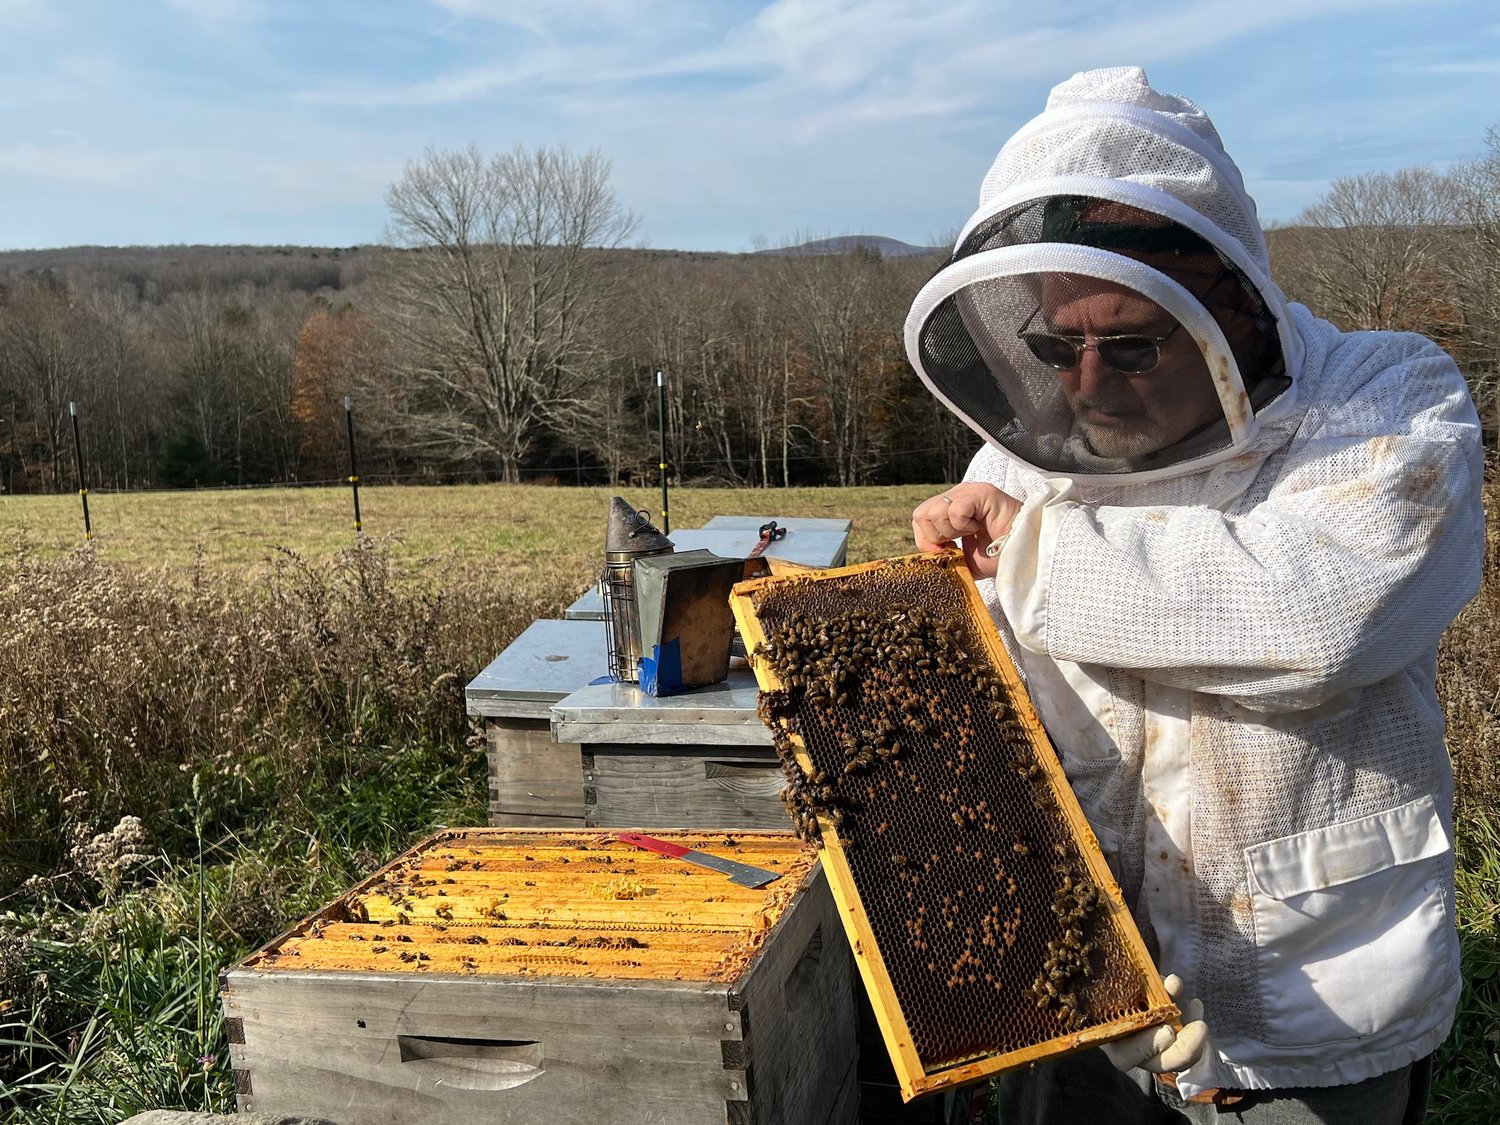 Beekeepers, suited up, kind of do look like astronauts.